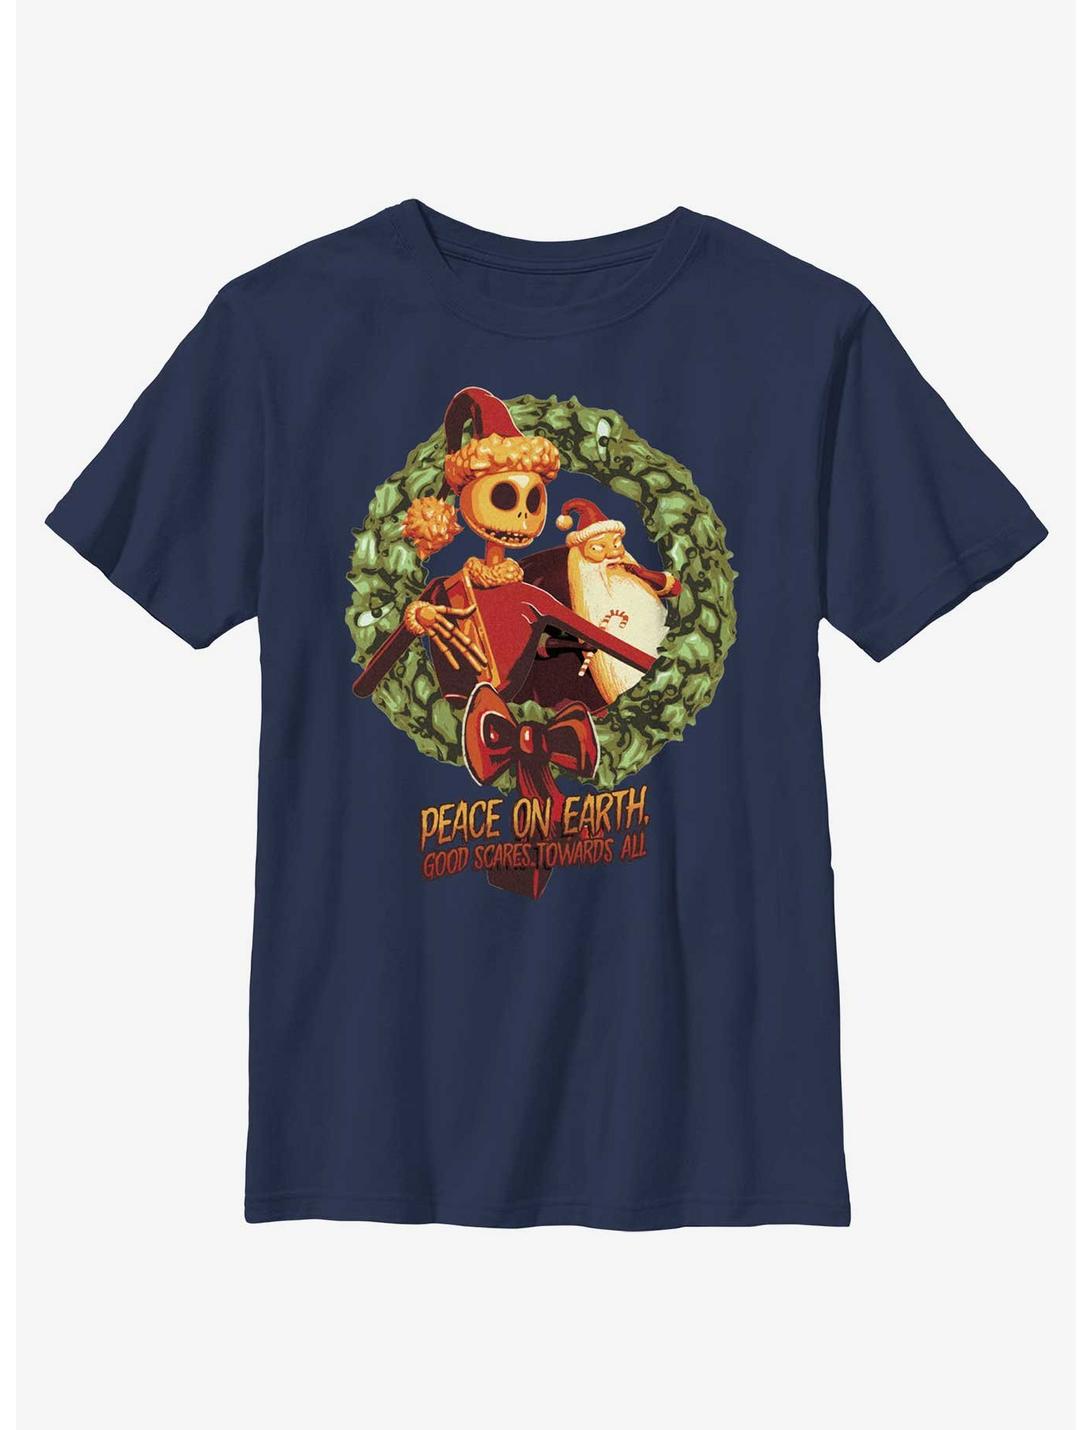 Disney Nightmare Before Christmas Peace On Earth Wreath Youth T-Shirt, NAVY, hi-res